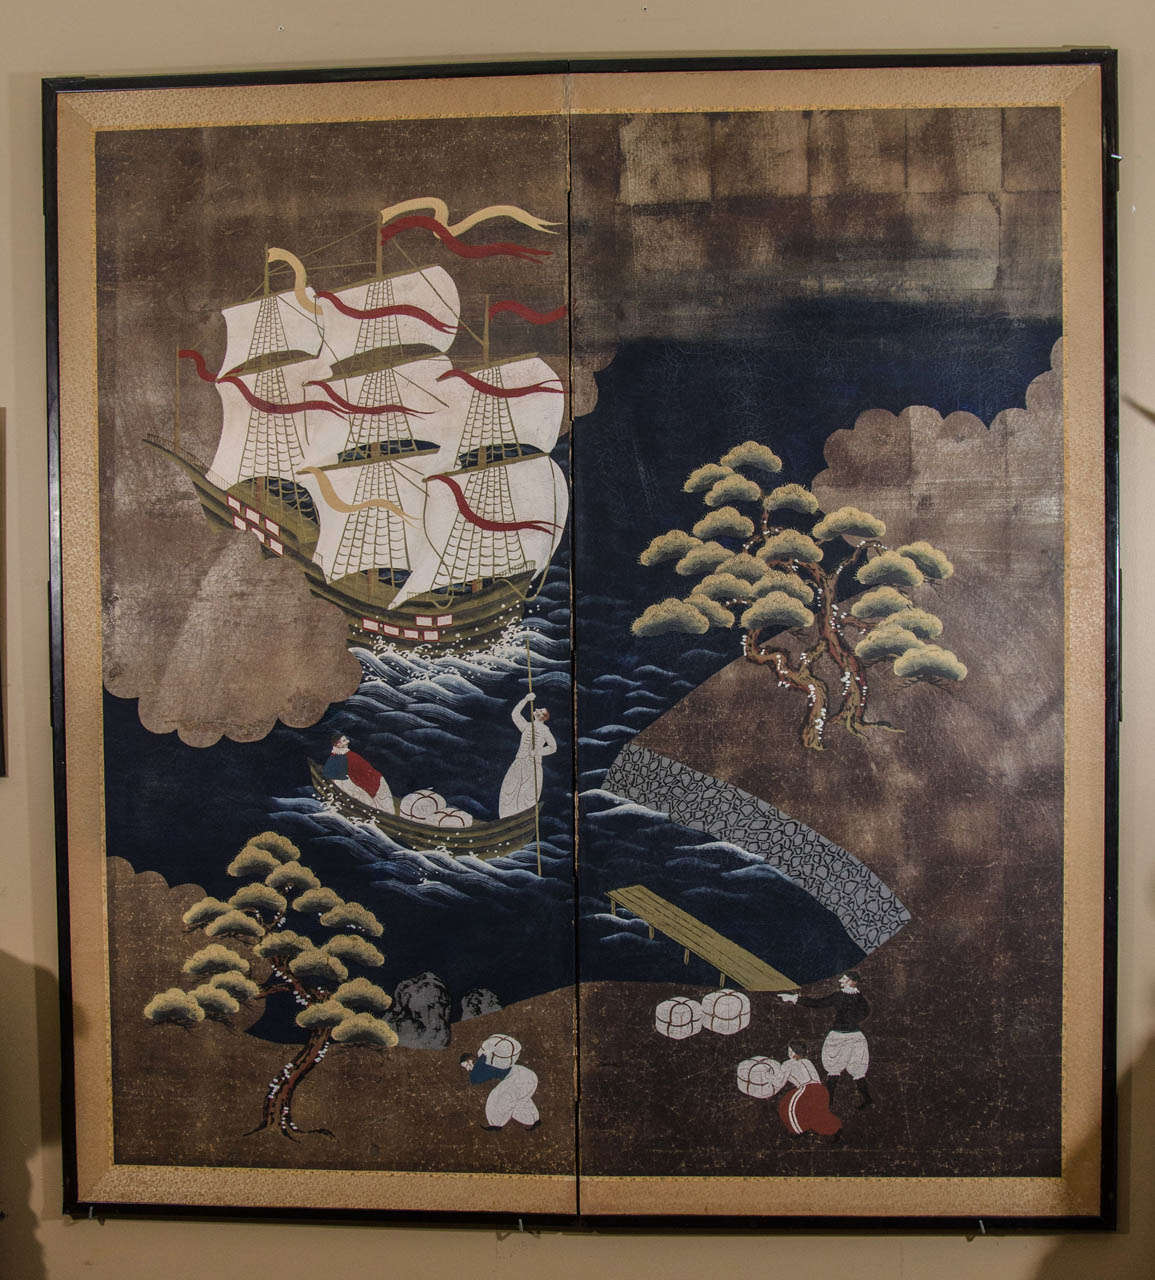 A two panel Japanese Namban screen from the Meiji Period depicting a Portuguese Caravel ship.

Good condition with age appropriate wear.